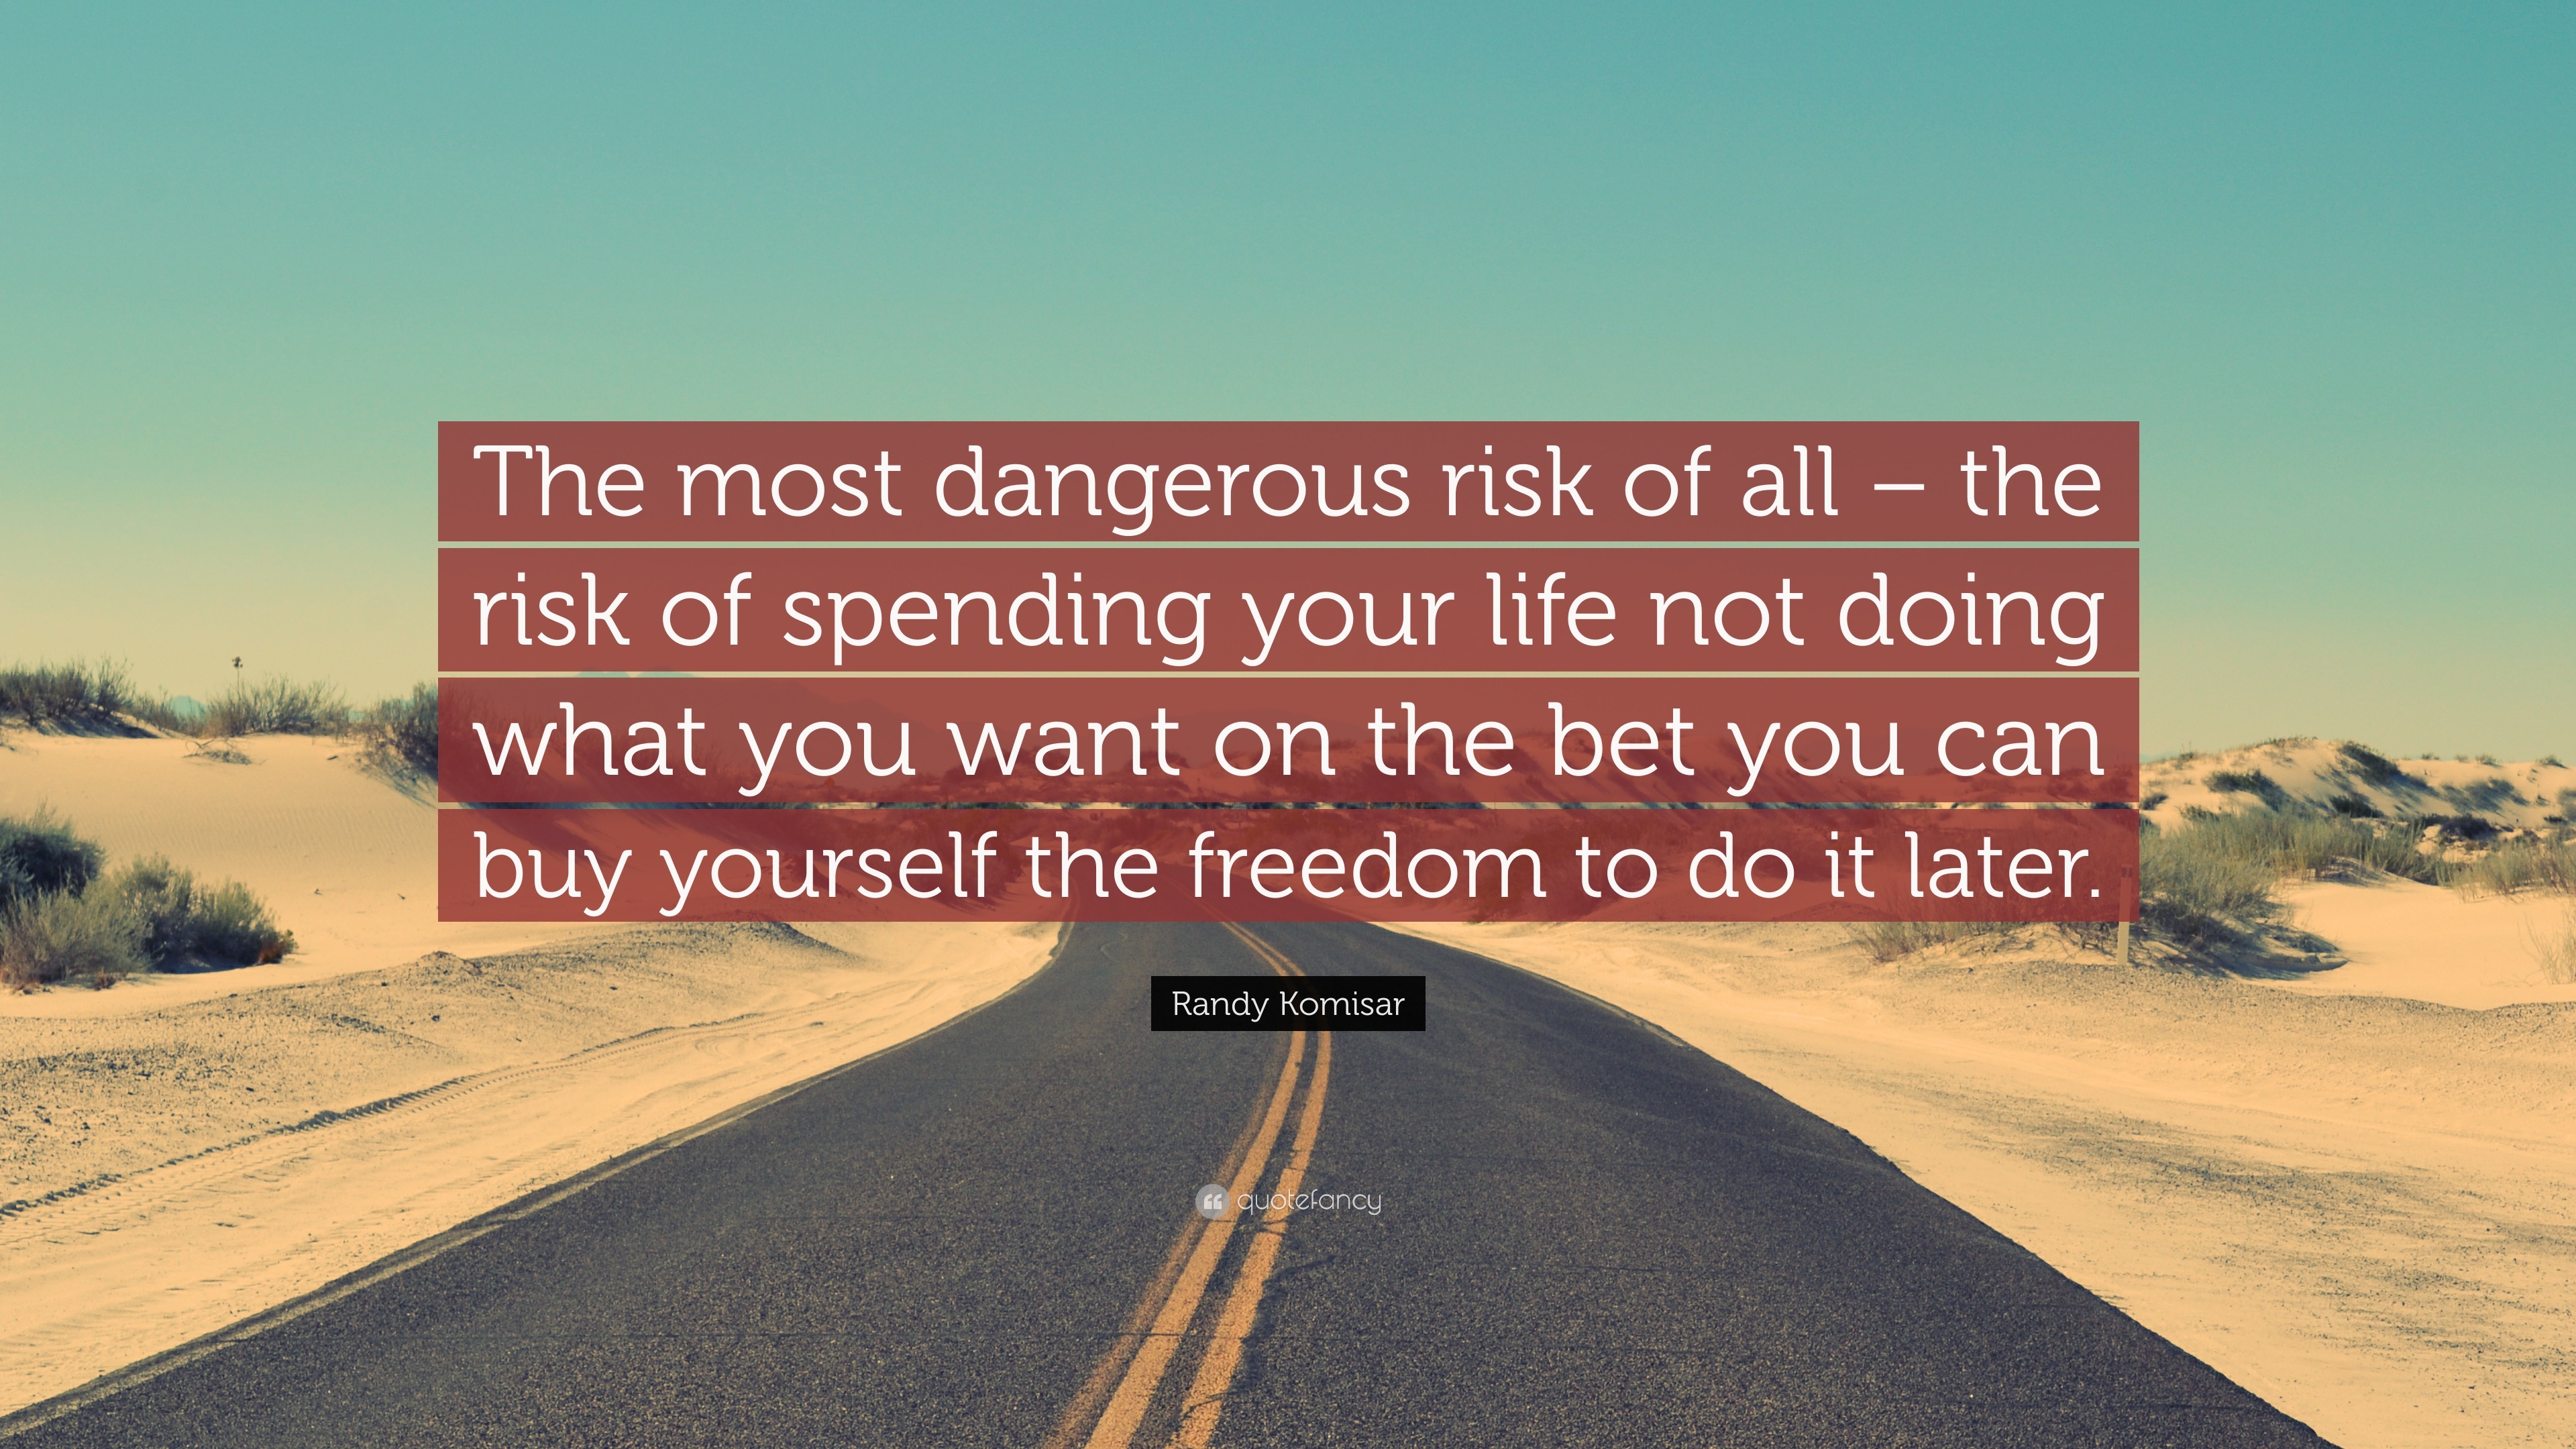 Randy Komisar Quote: “The most dangerous risk of all – the risk of ...